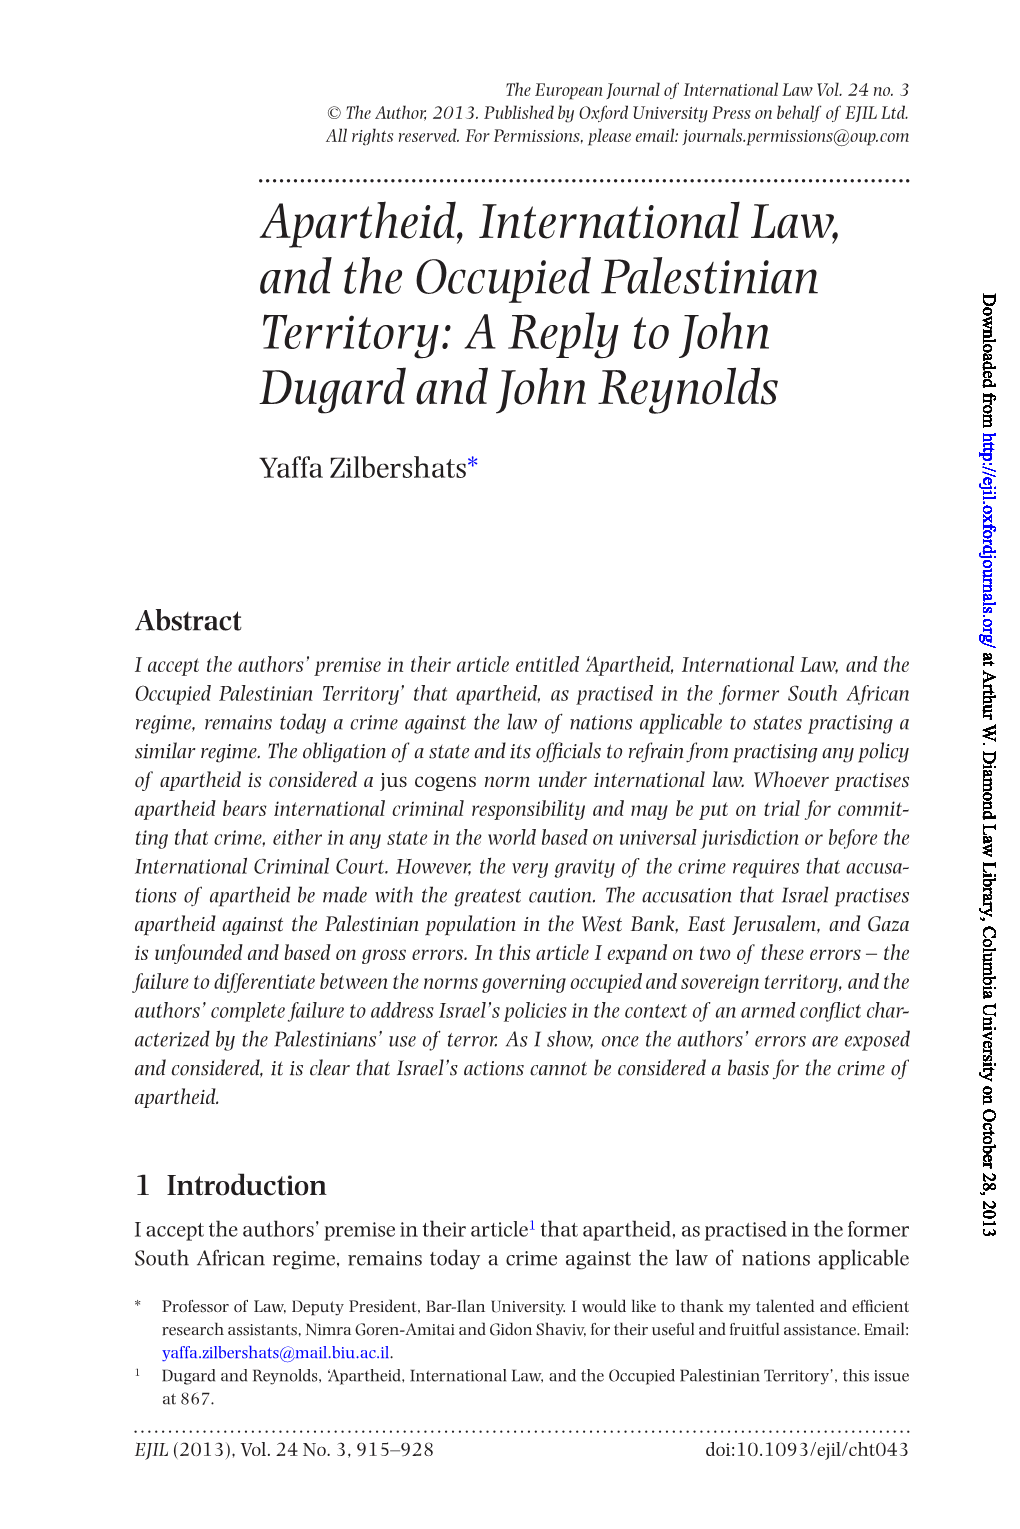 Apartheid, International Law, and the Occupied Palestinian Territory: a Reply 917